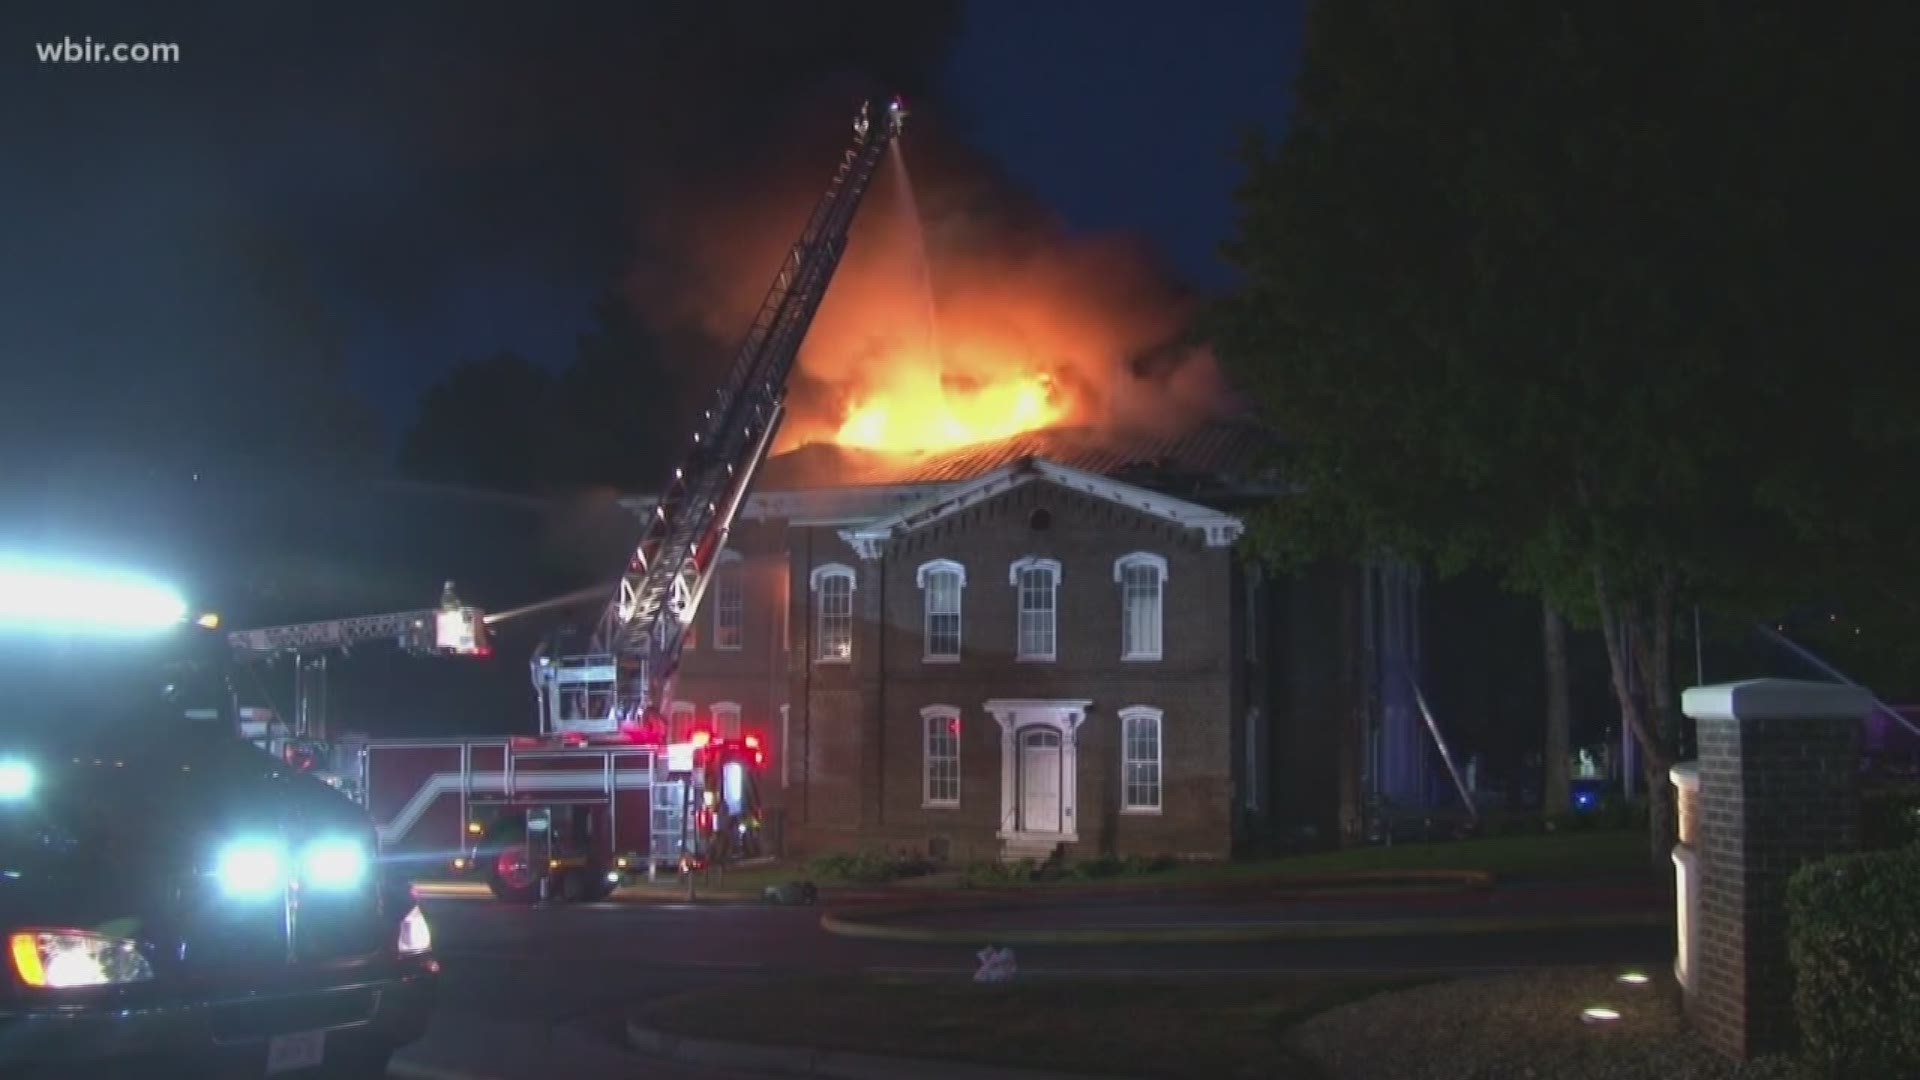 The fire broke out Tuesday evening while no one was inside, causing devastating damage to the historic county building.